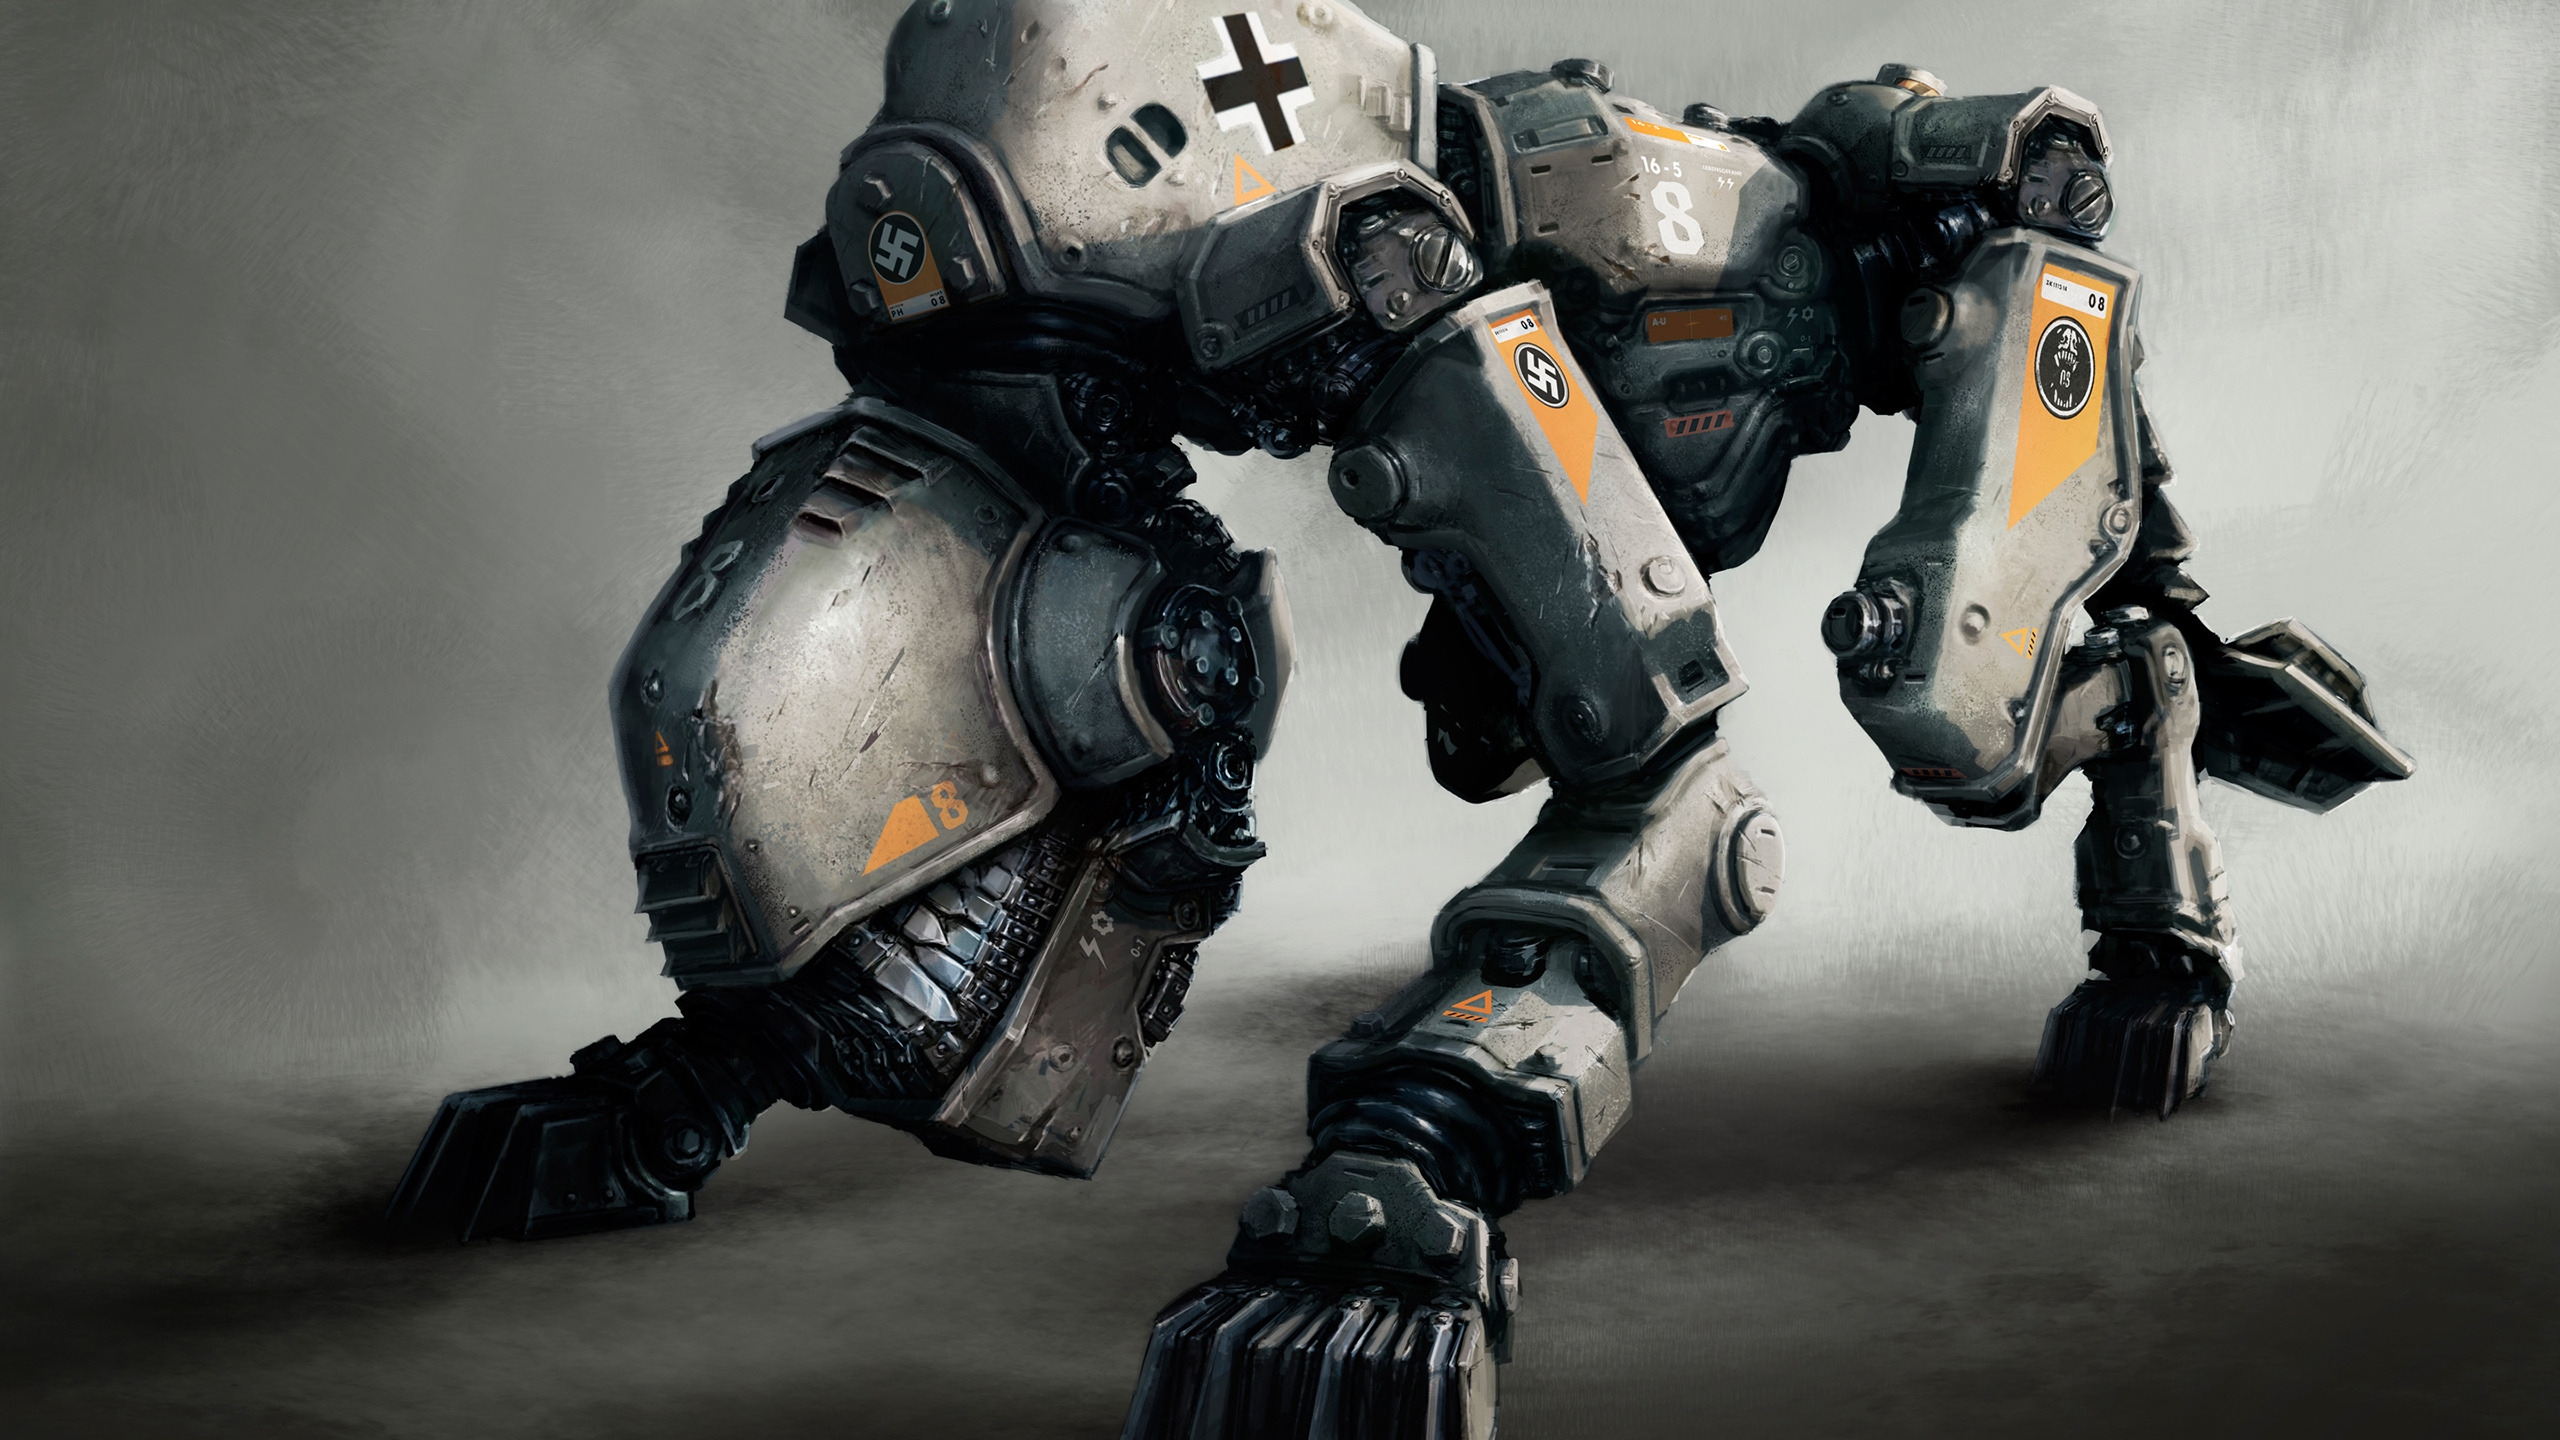 Robot from Wolfenstein The New Order for 2560x1440 HDTV resolution